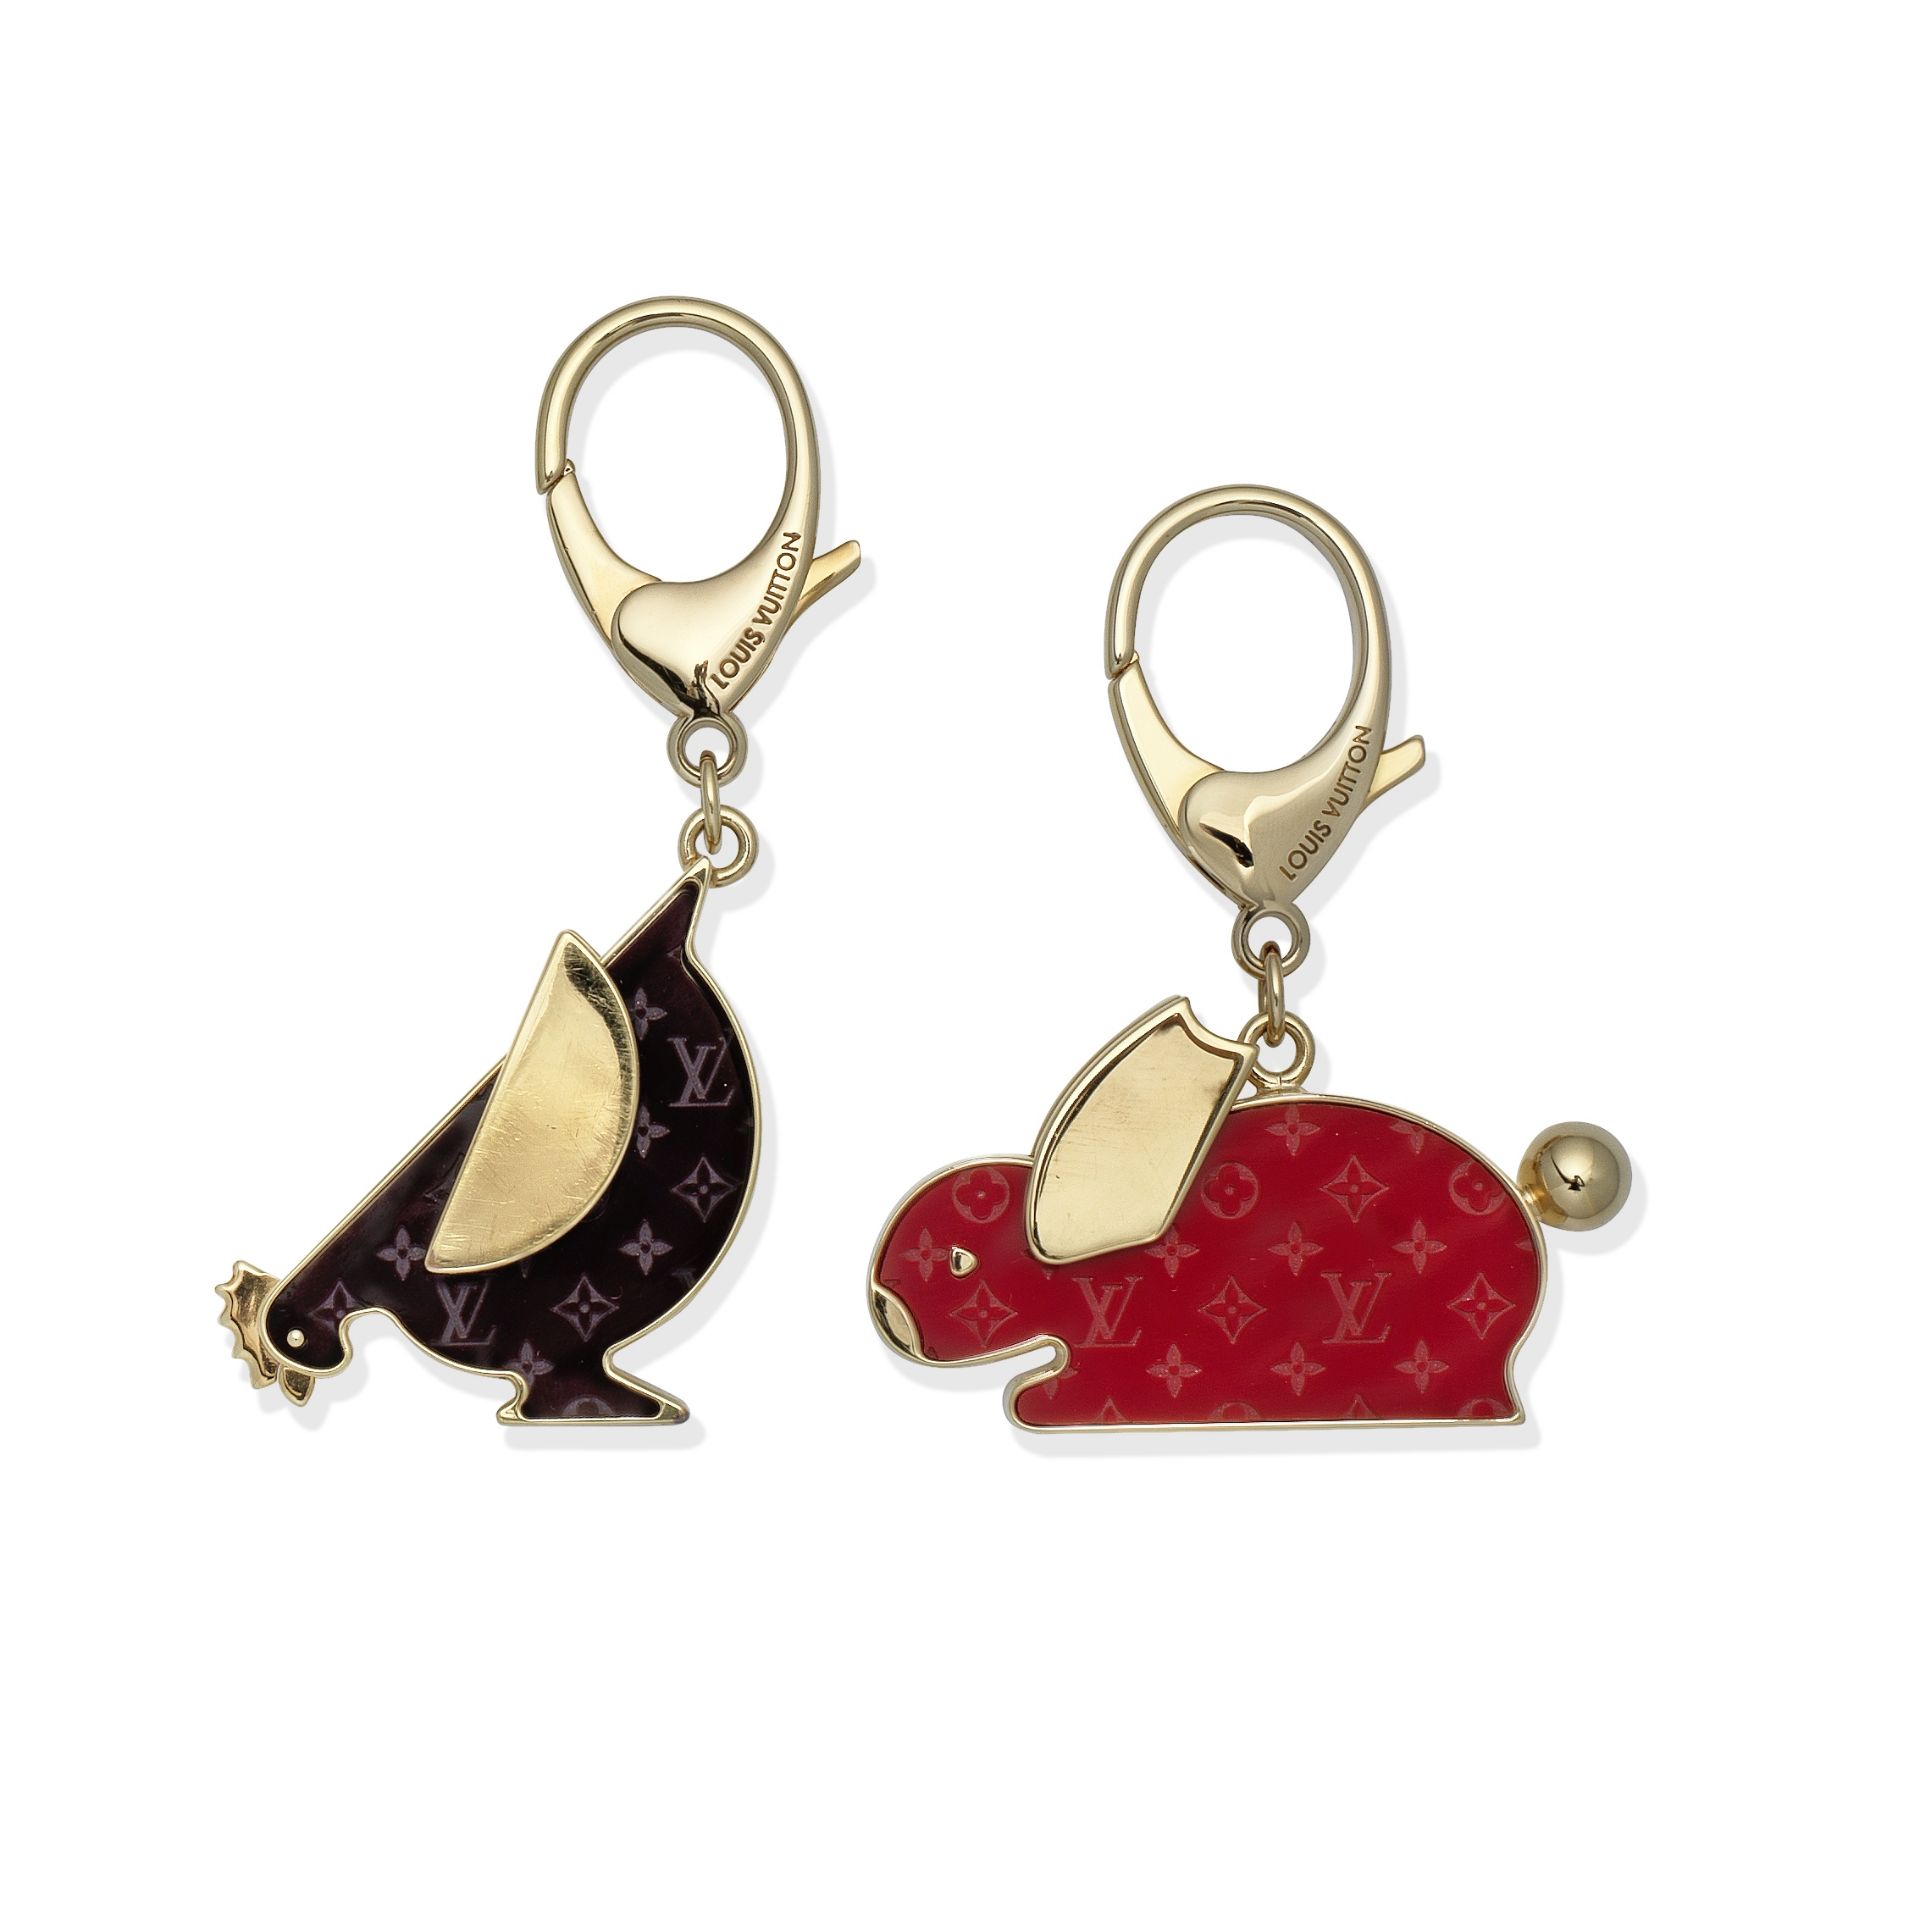 Amarante Rooster and Red Rabbit Bag Charms/ Key Holders, Louis Vuitton, c. 2010, (Includes dust b...